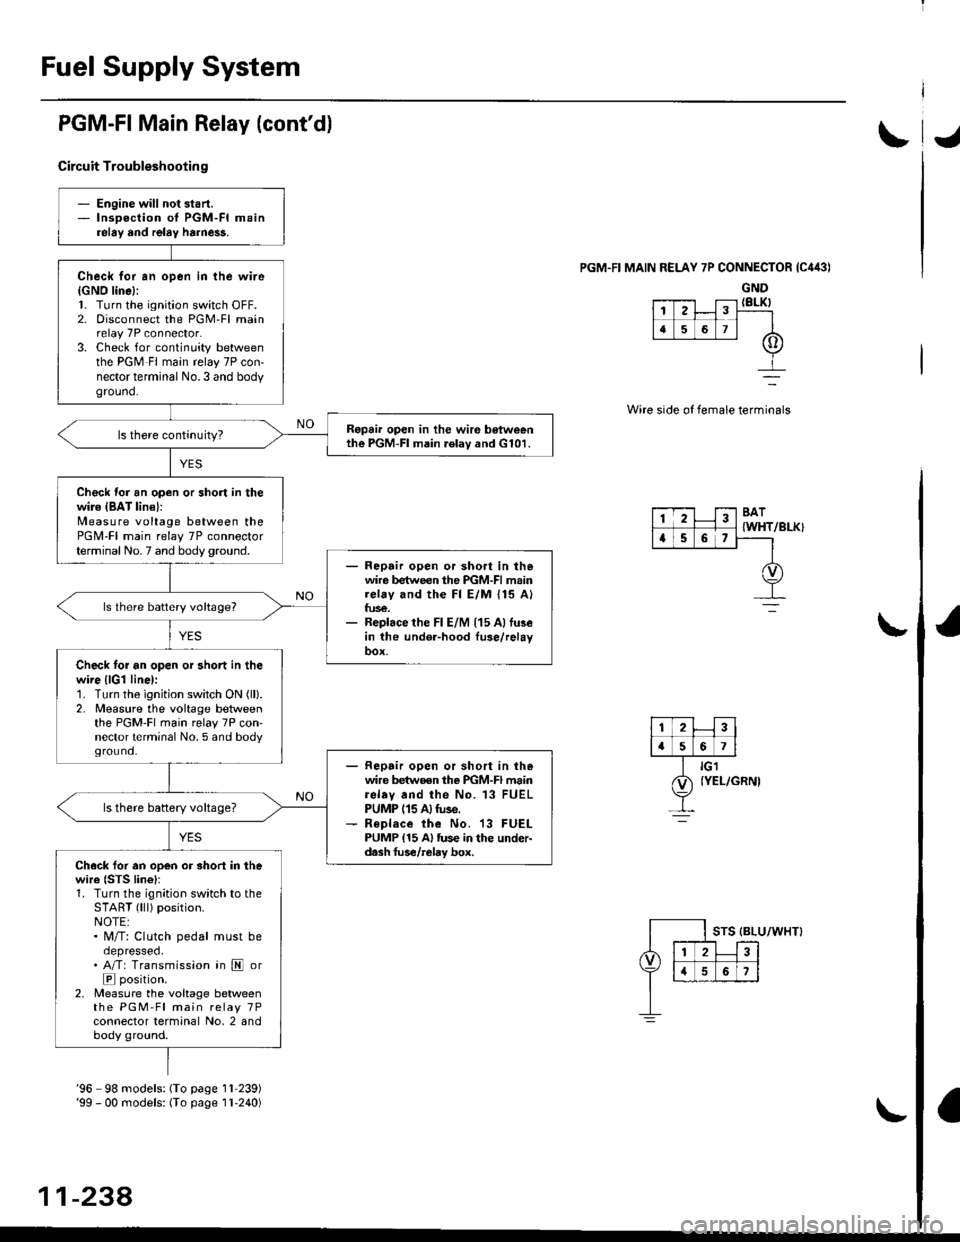 HONDA CIVIC 1998 6.G Service Manual Fuel Supply System
PGM-FI Main Relay (contdl
Circuit Troubleshootin g
PGM.FI MAIN RELAY 7P CONNECTOR {C443)
GND{8LK)
Wire side of female terminals
/BLK}
- Engine will not start.- lnsoection of PGM-FI